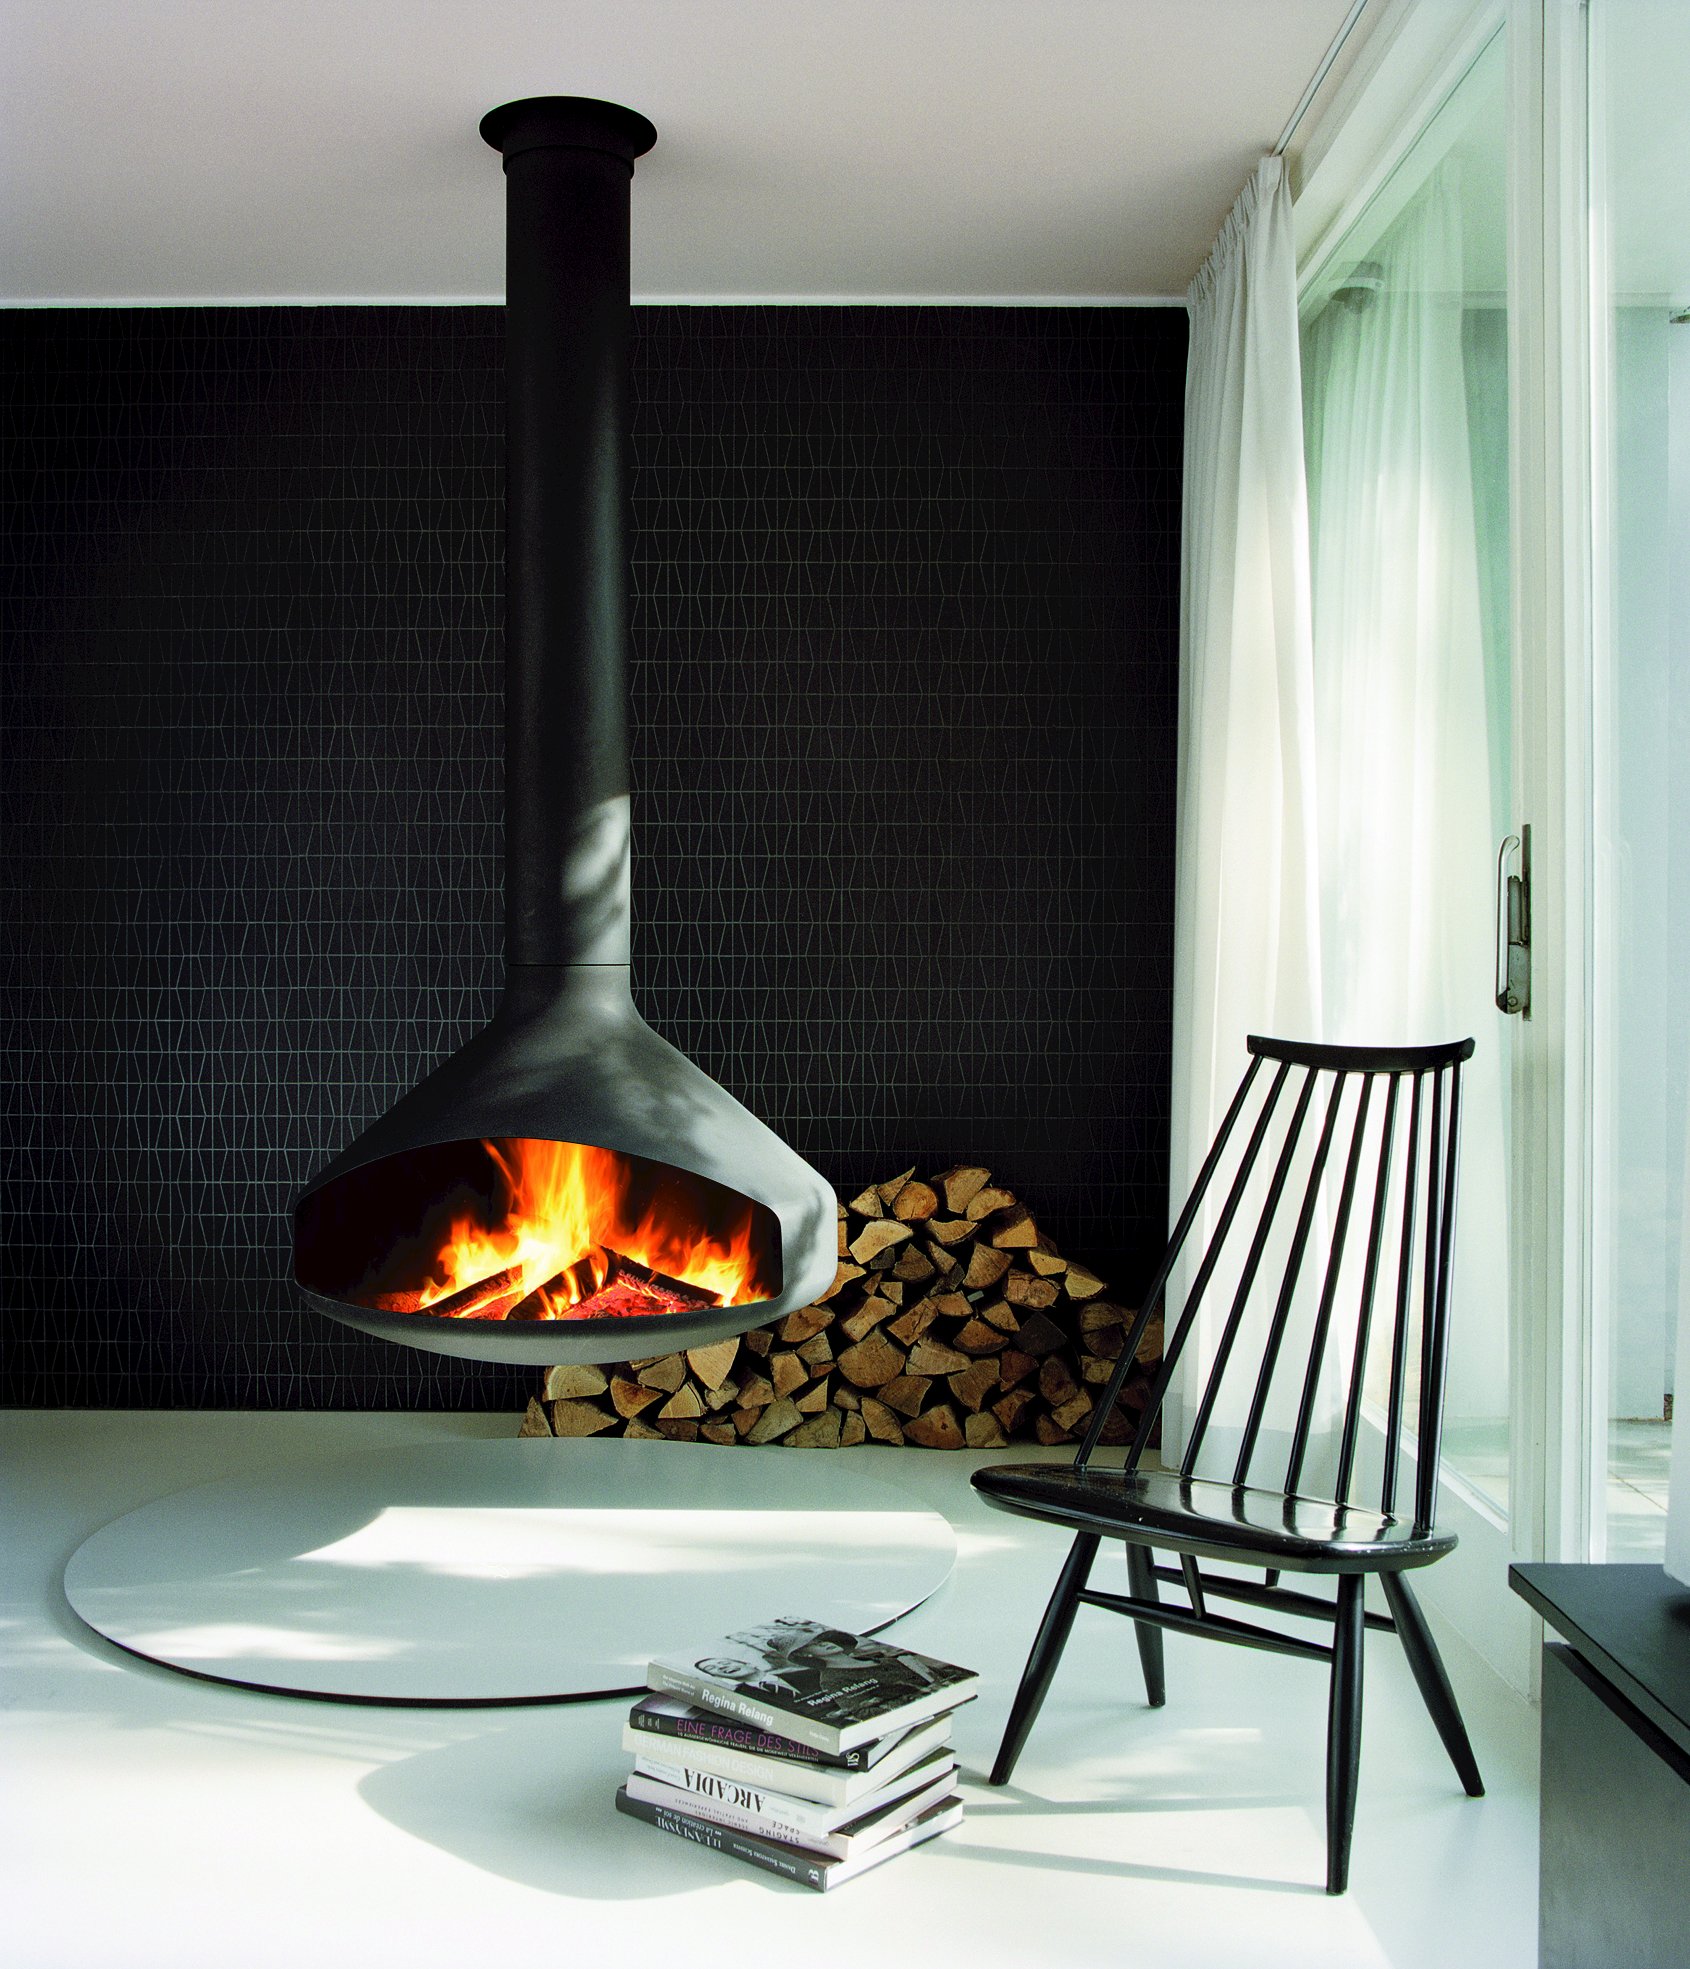 Cool fireplaces and stoves